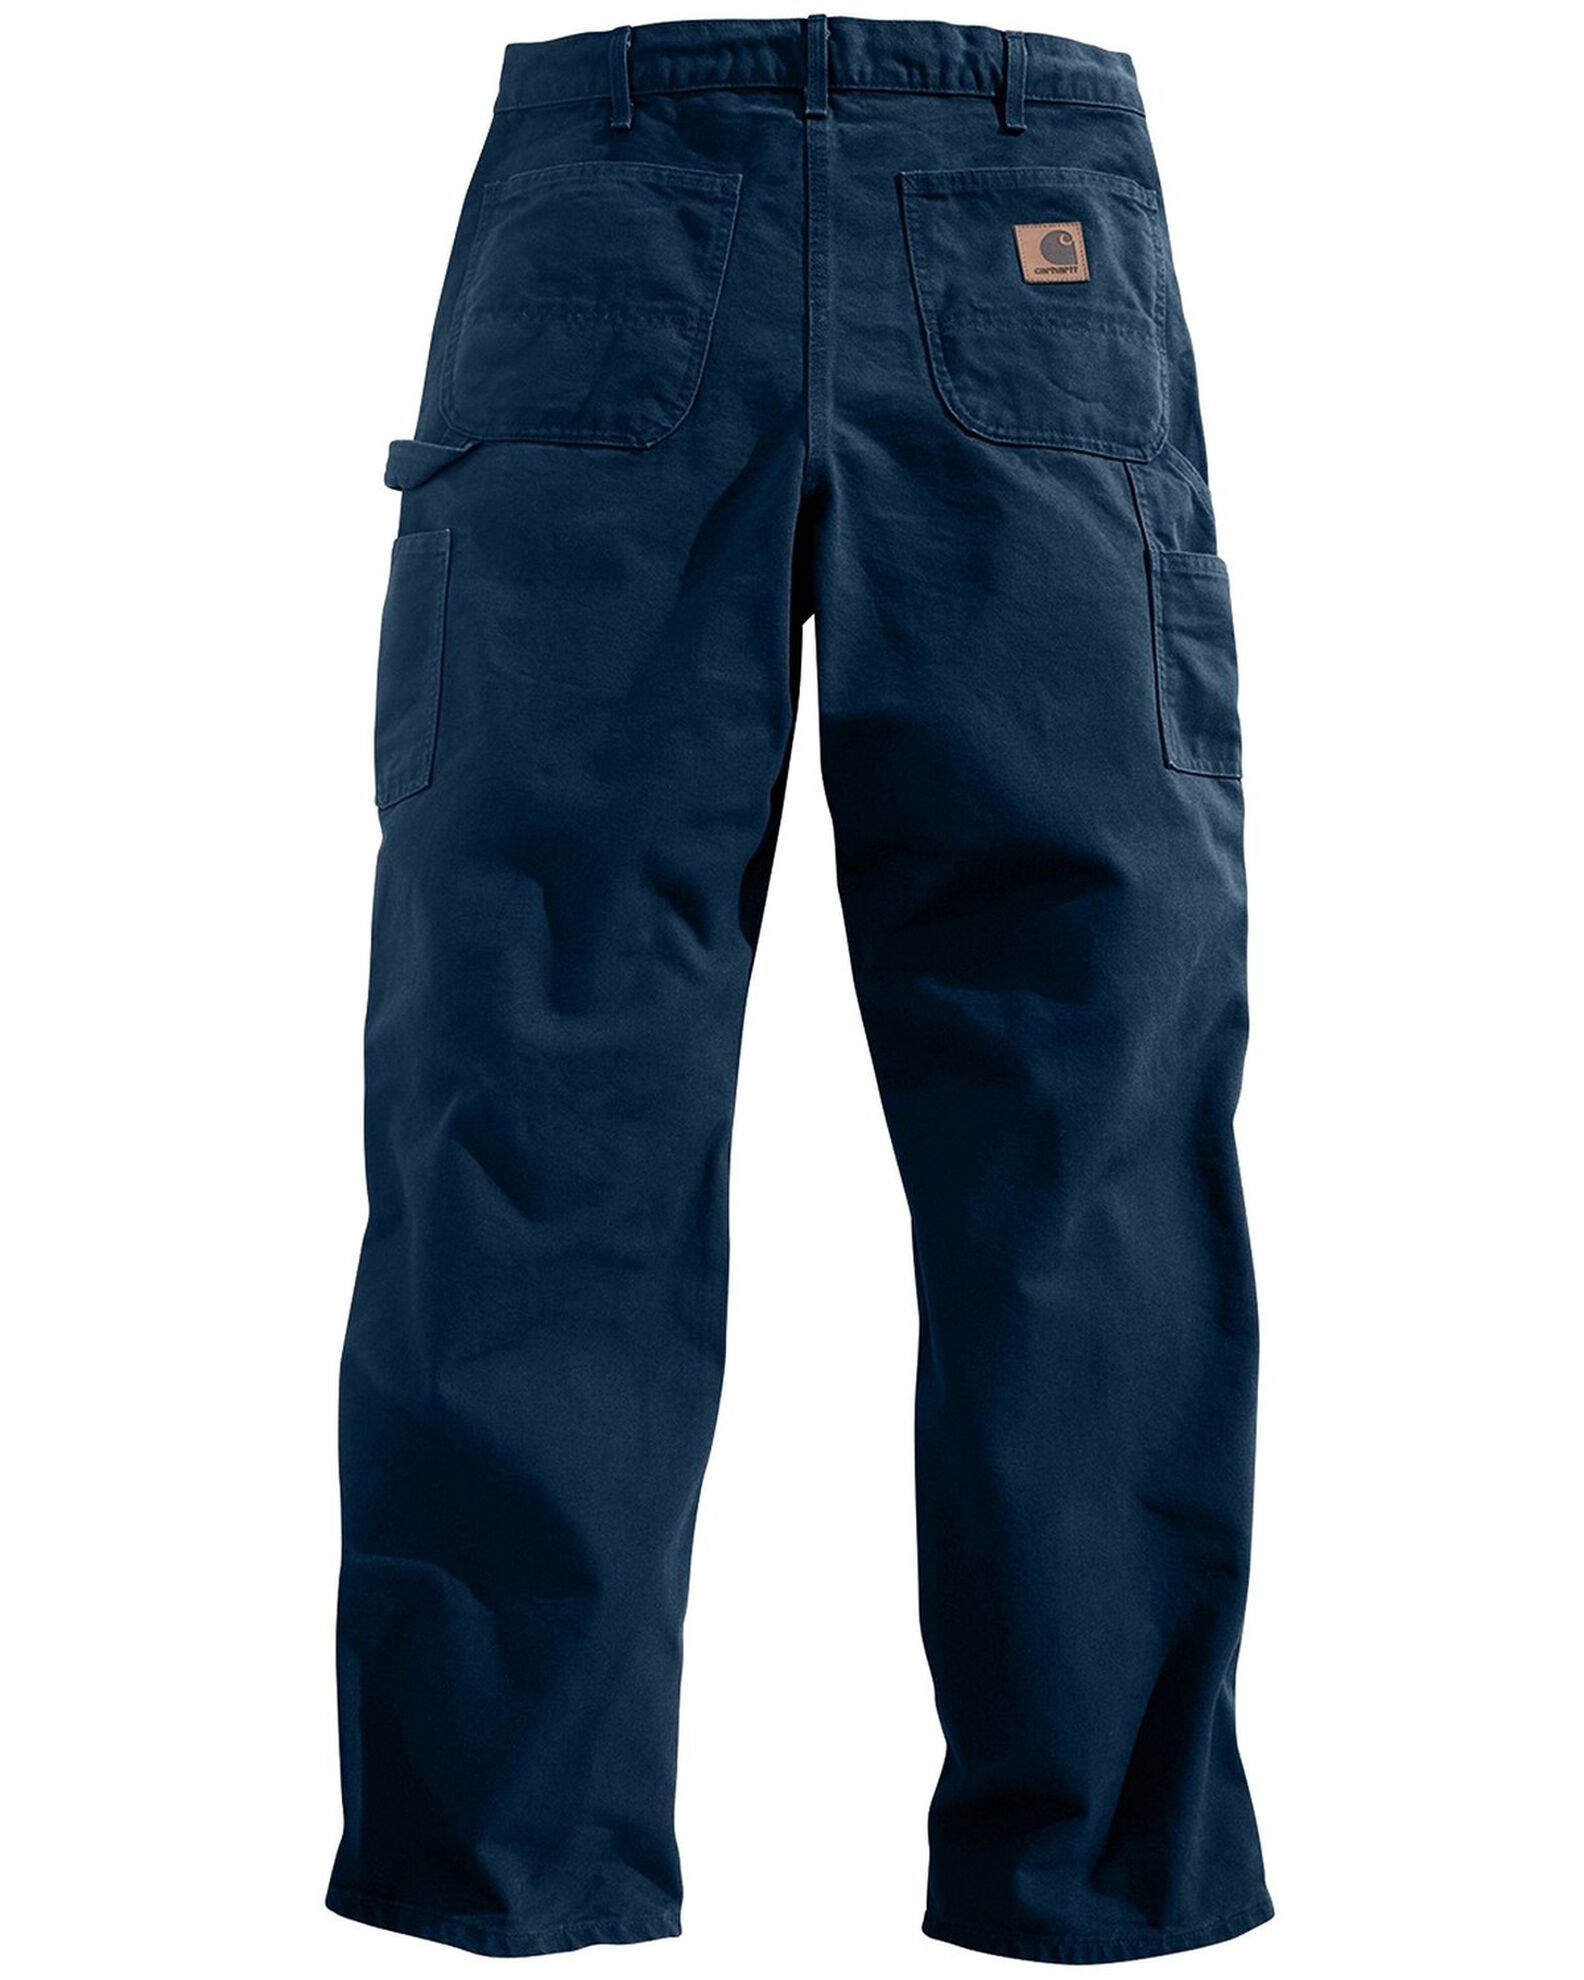 Carhartt Washed Duck Work Dungaree (Moss) – Frontier Western Store